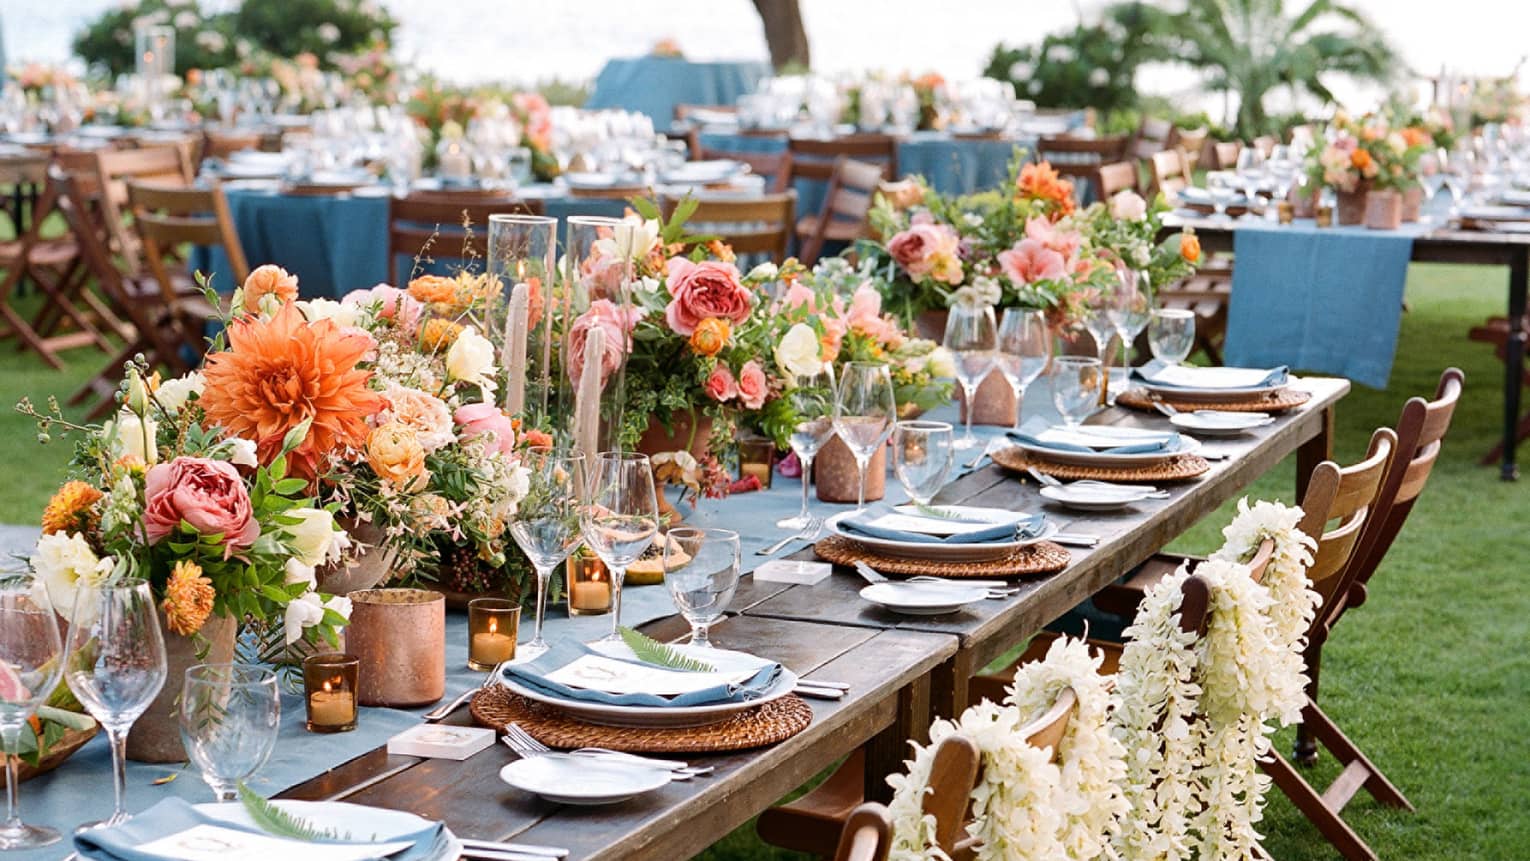 Close-up of outdoor banquet dining table with flower arrangements, white floral leis draped over chairs